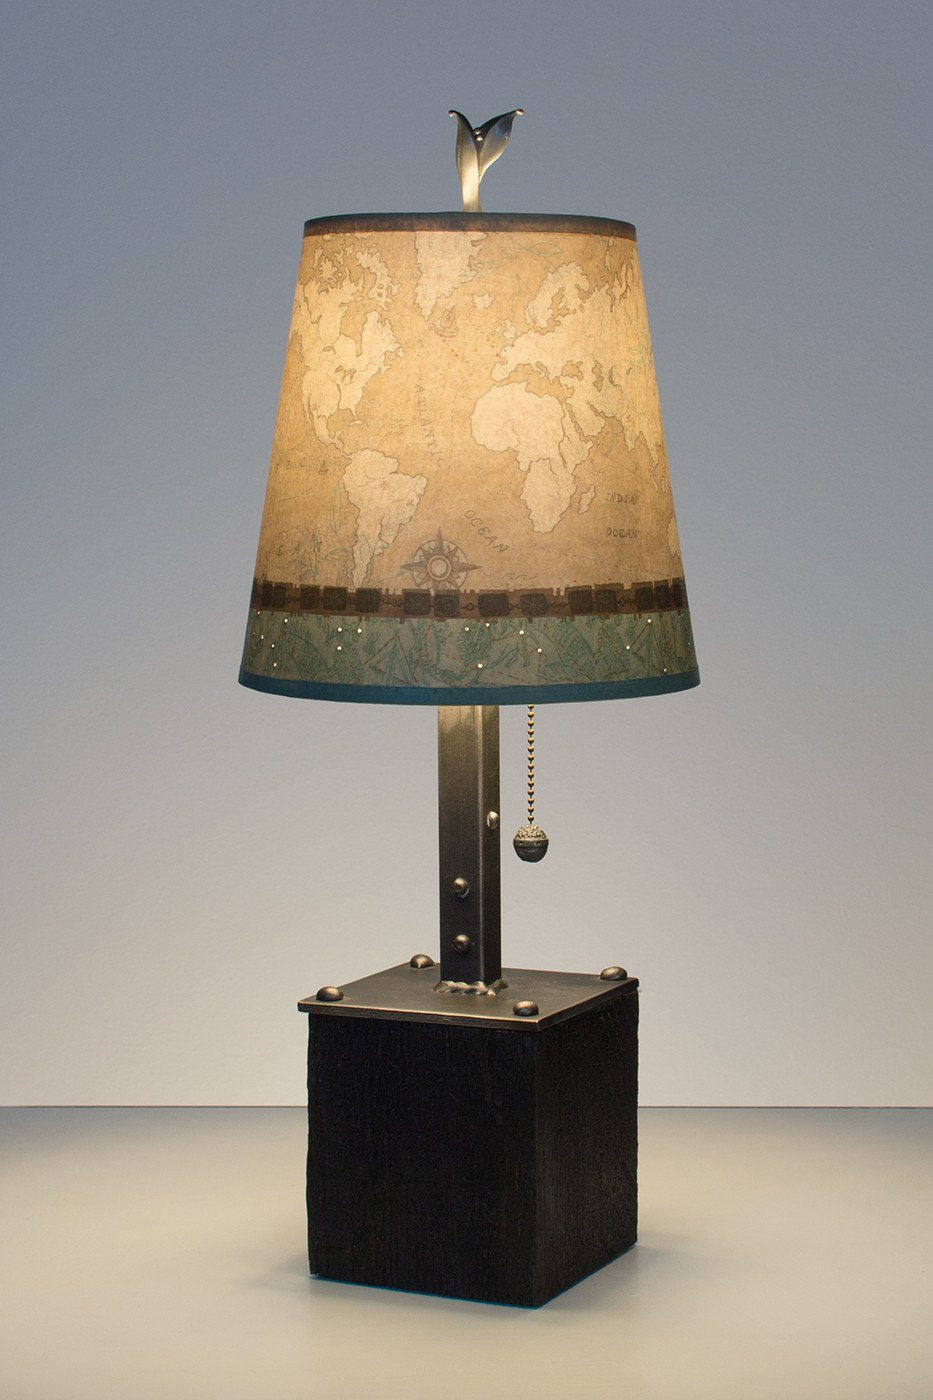 Steel Table Lamp on Reclaimed Wood with Small Drum Shade in Sand Map Lit